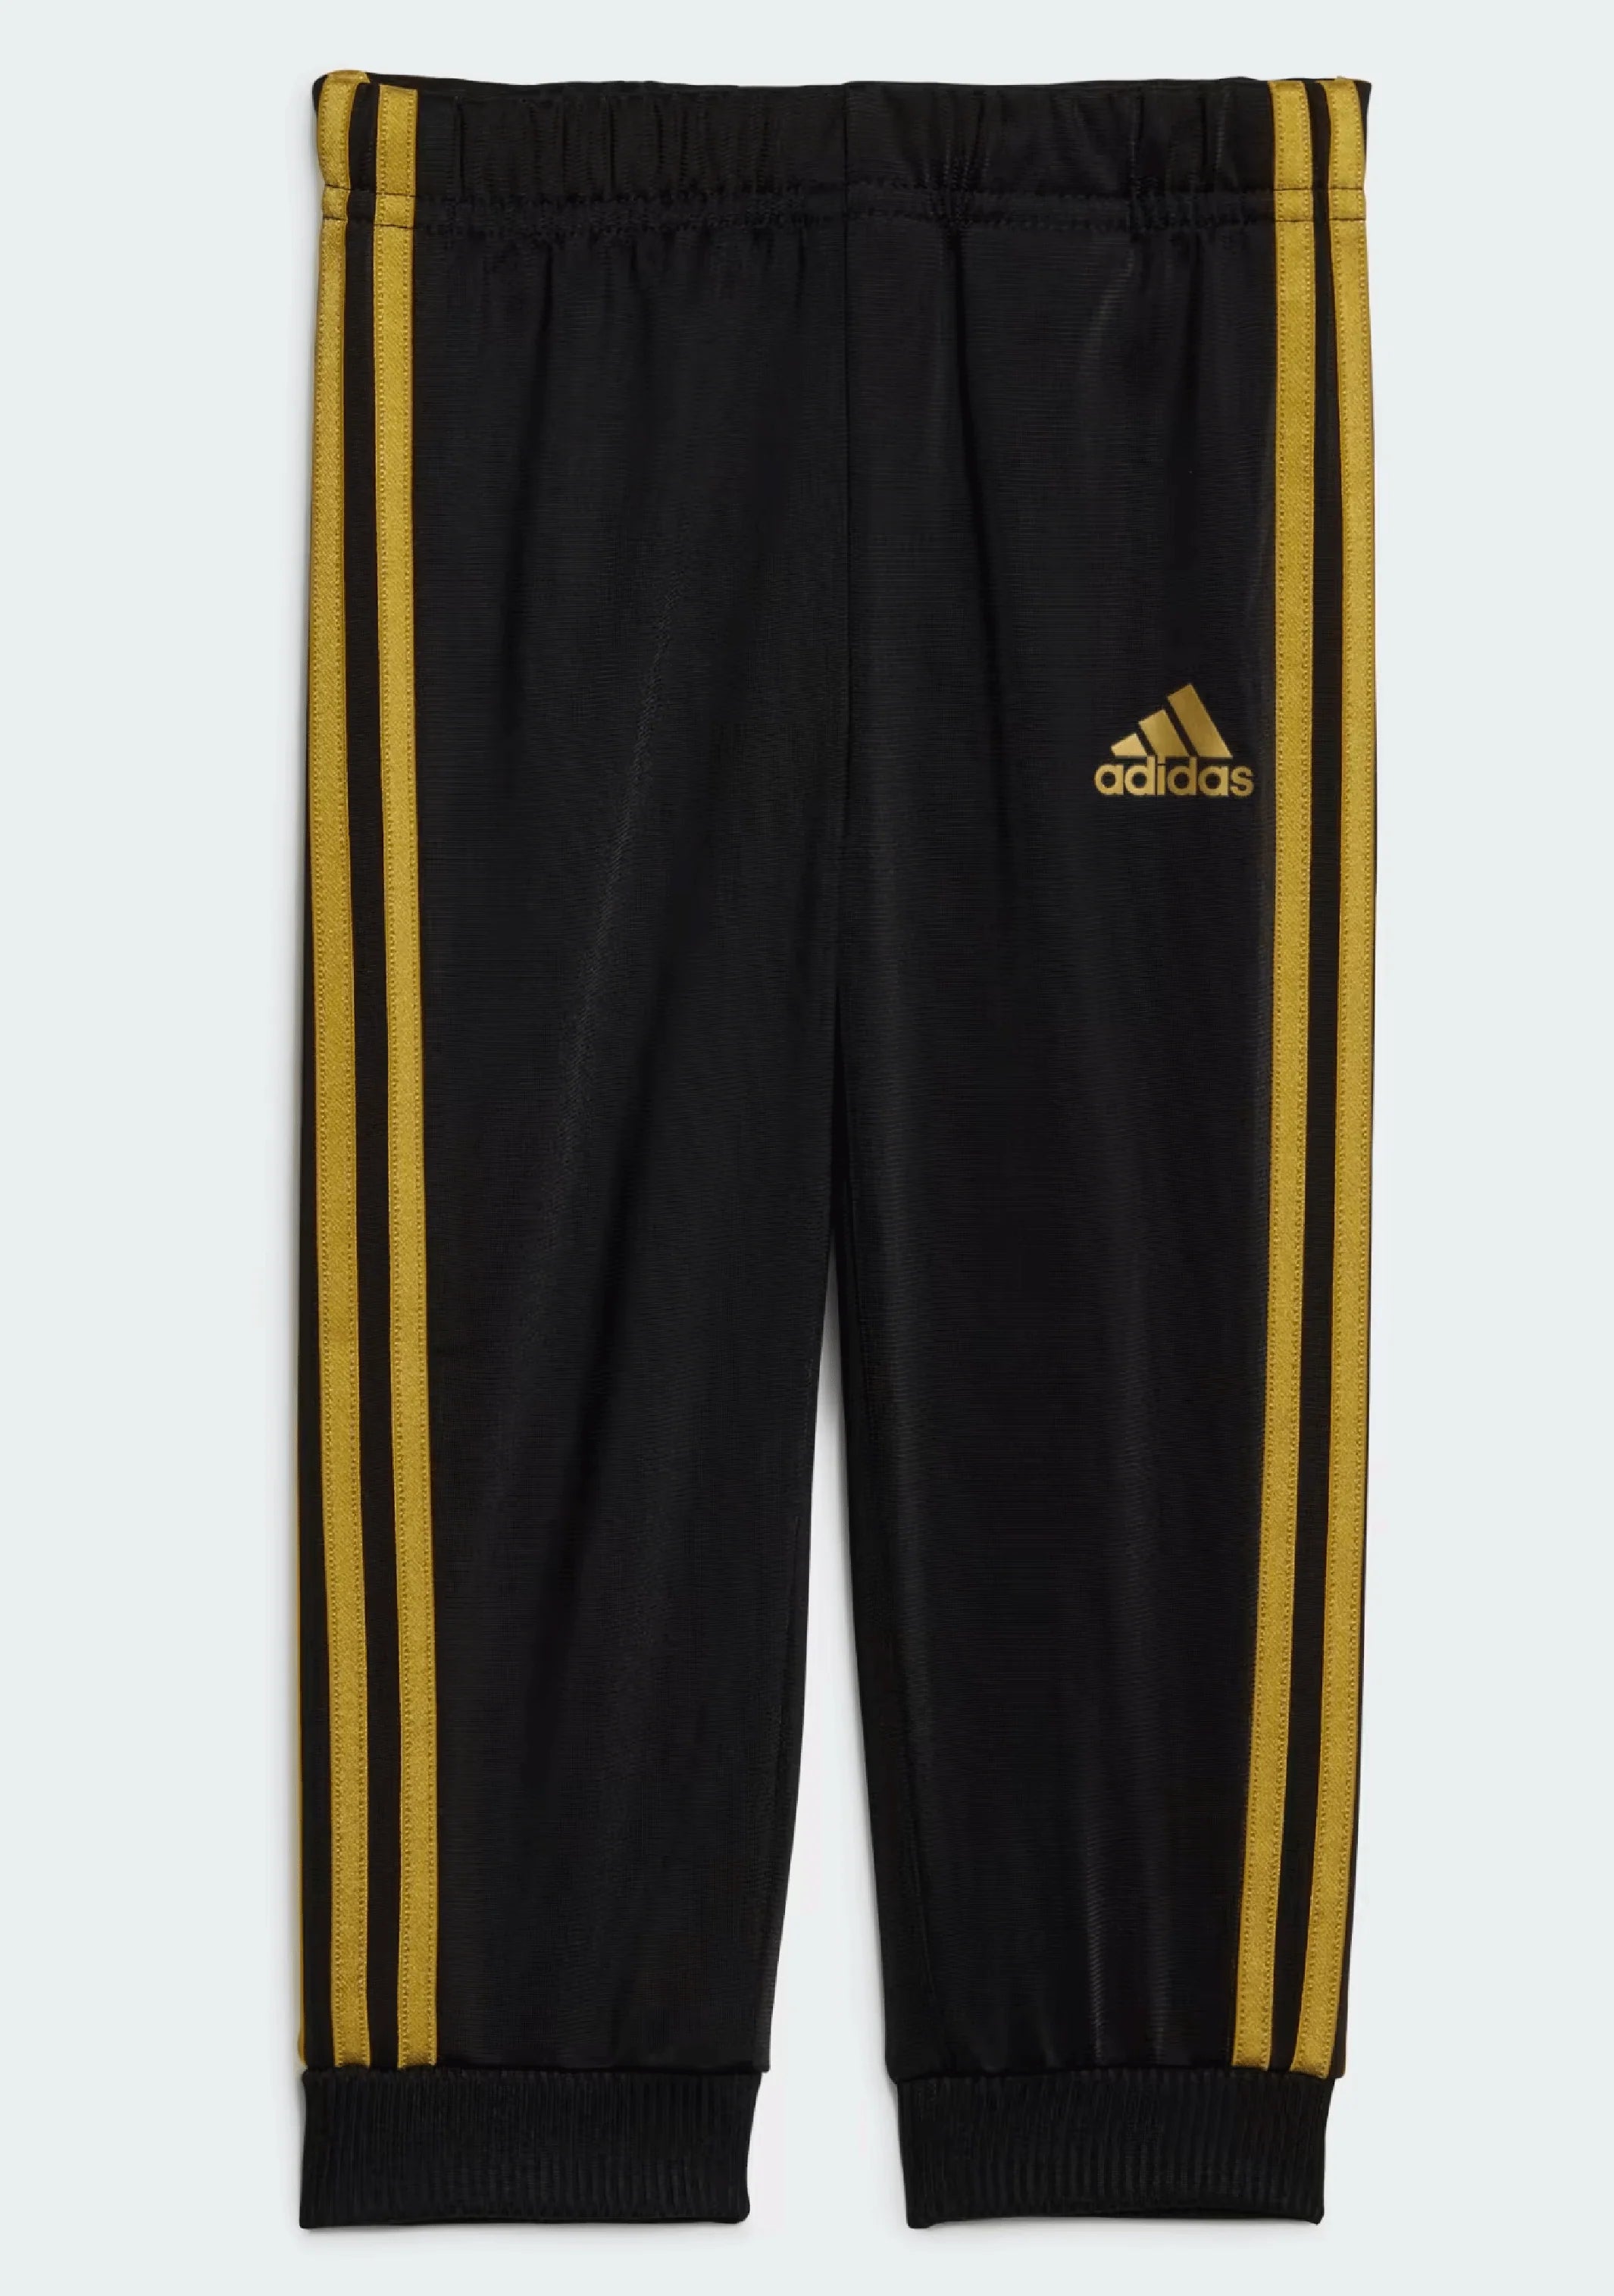 AA-D23 (Adidas essentials shiny hooded tracksuit black/gold mettalic) 32493370